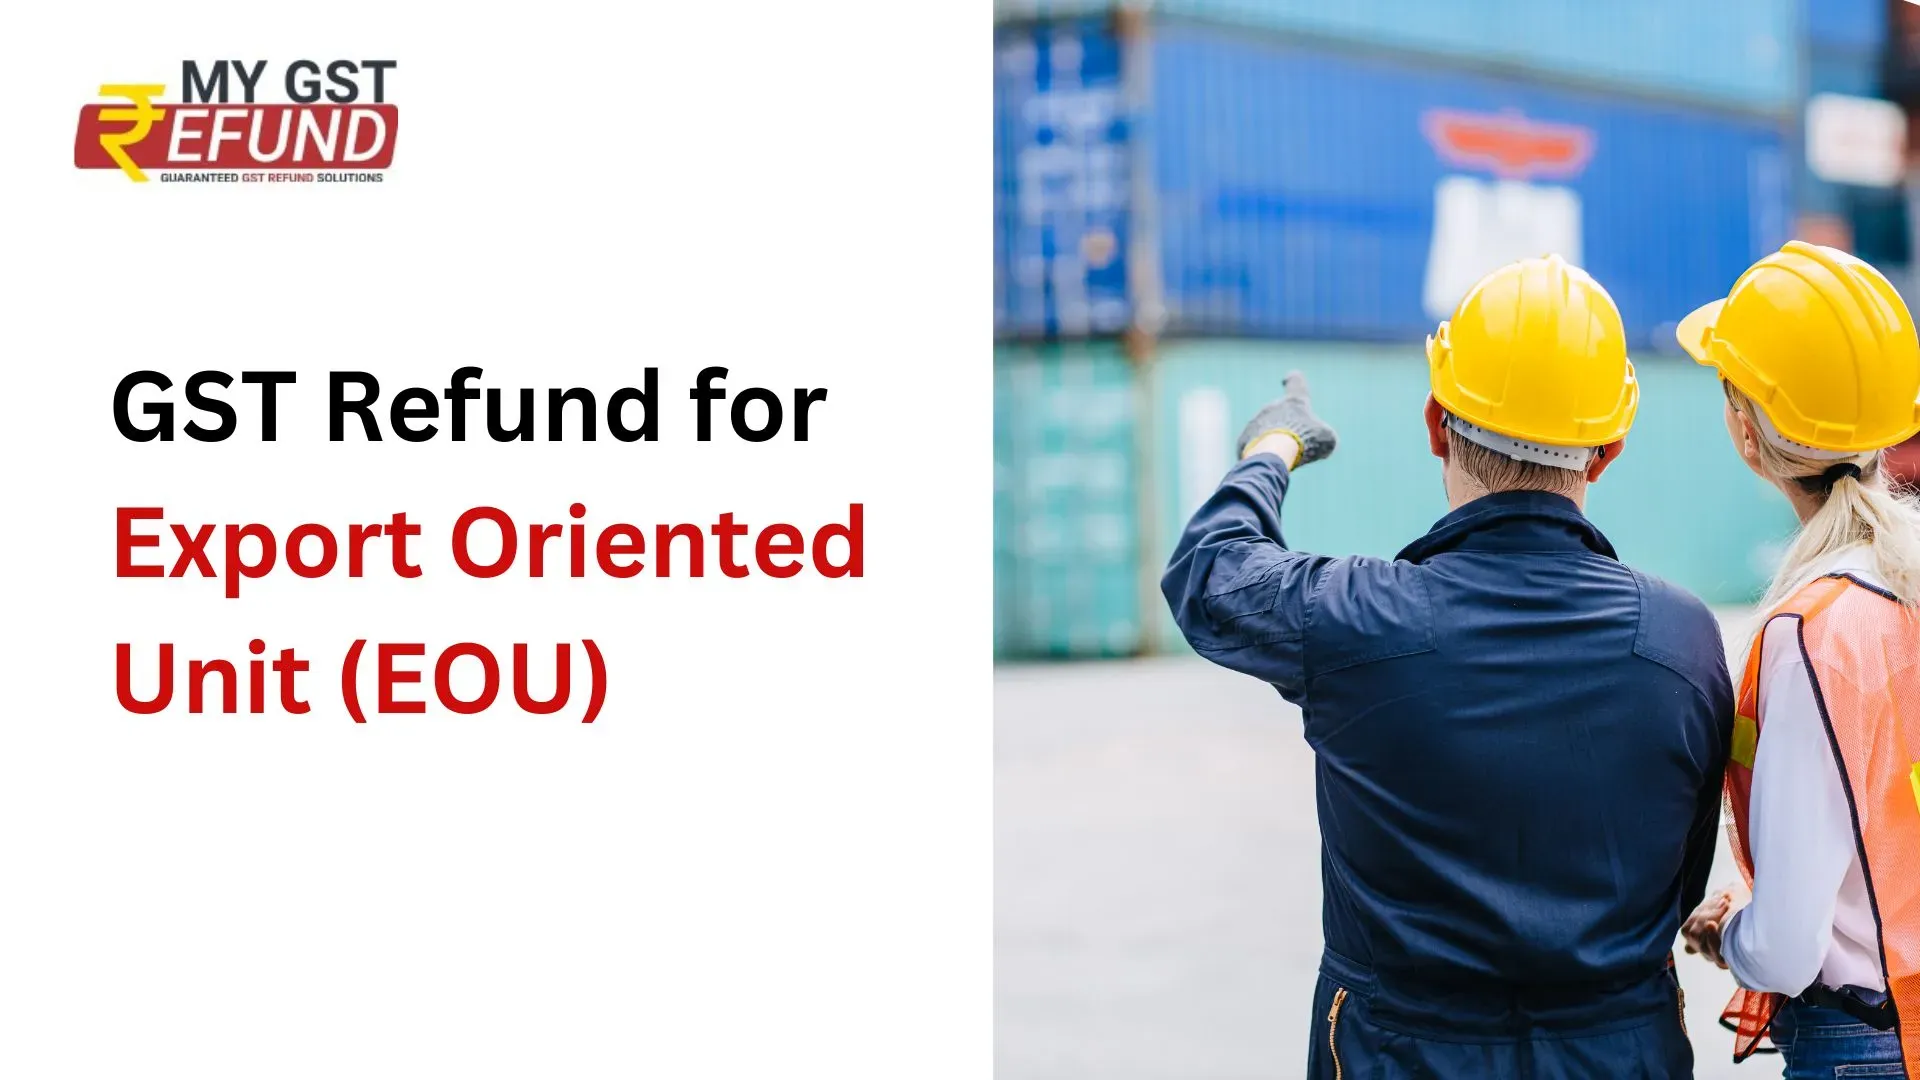 GST Refund for Export Oriented Unit (EOU)